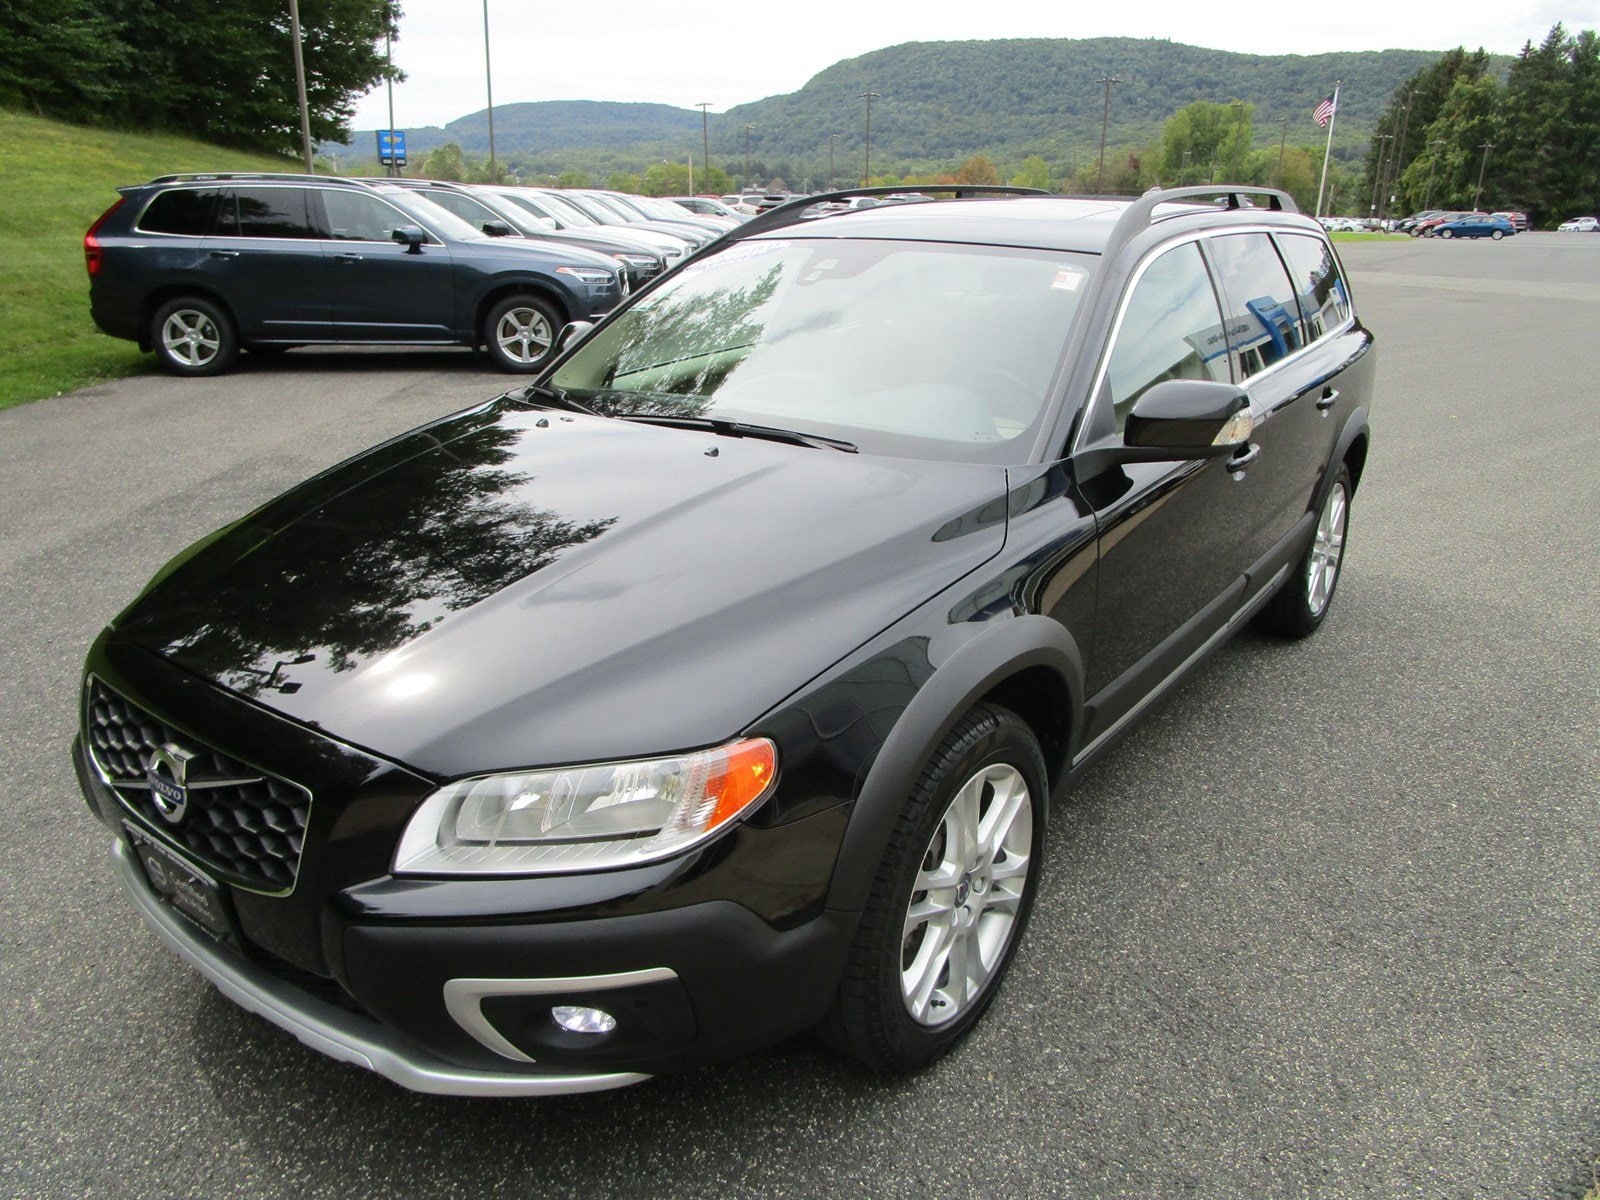 Certified Used Volvo Xc70 T5 Premier For Sale In Cheshire Ma